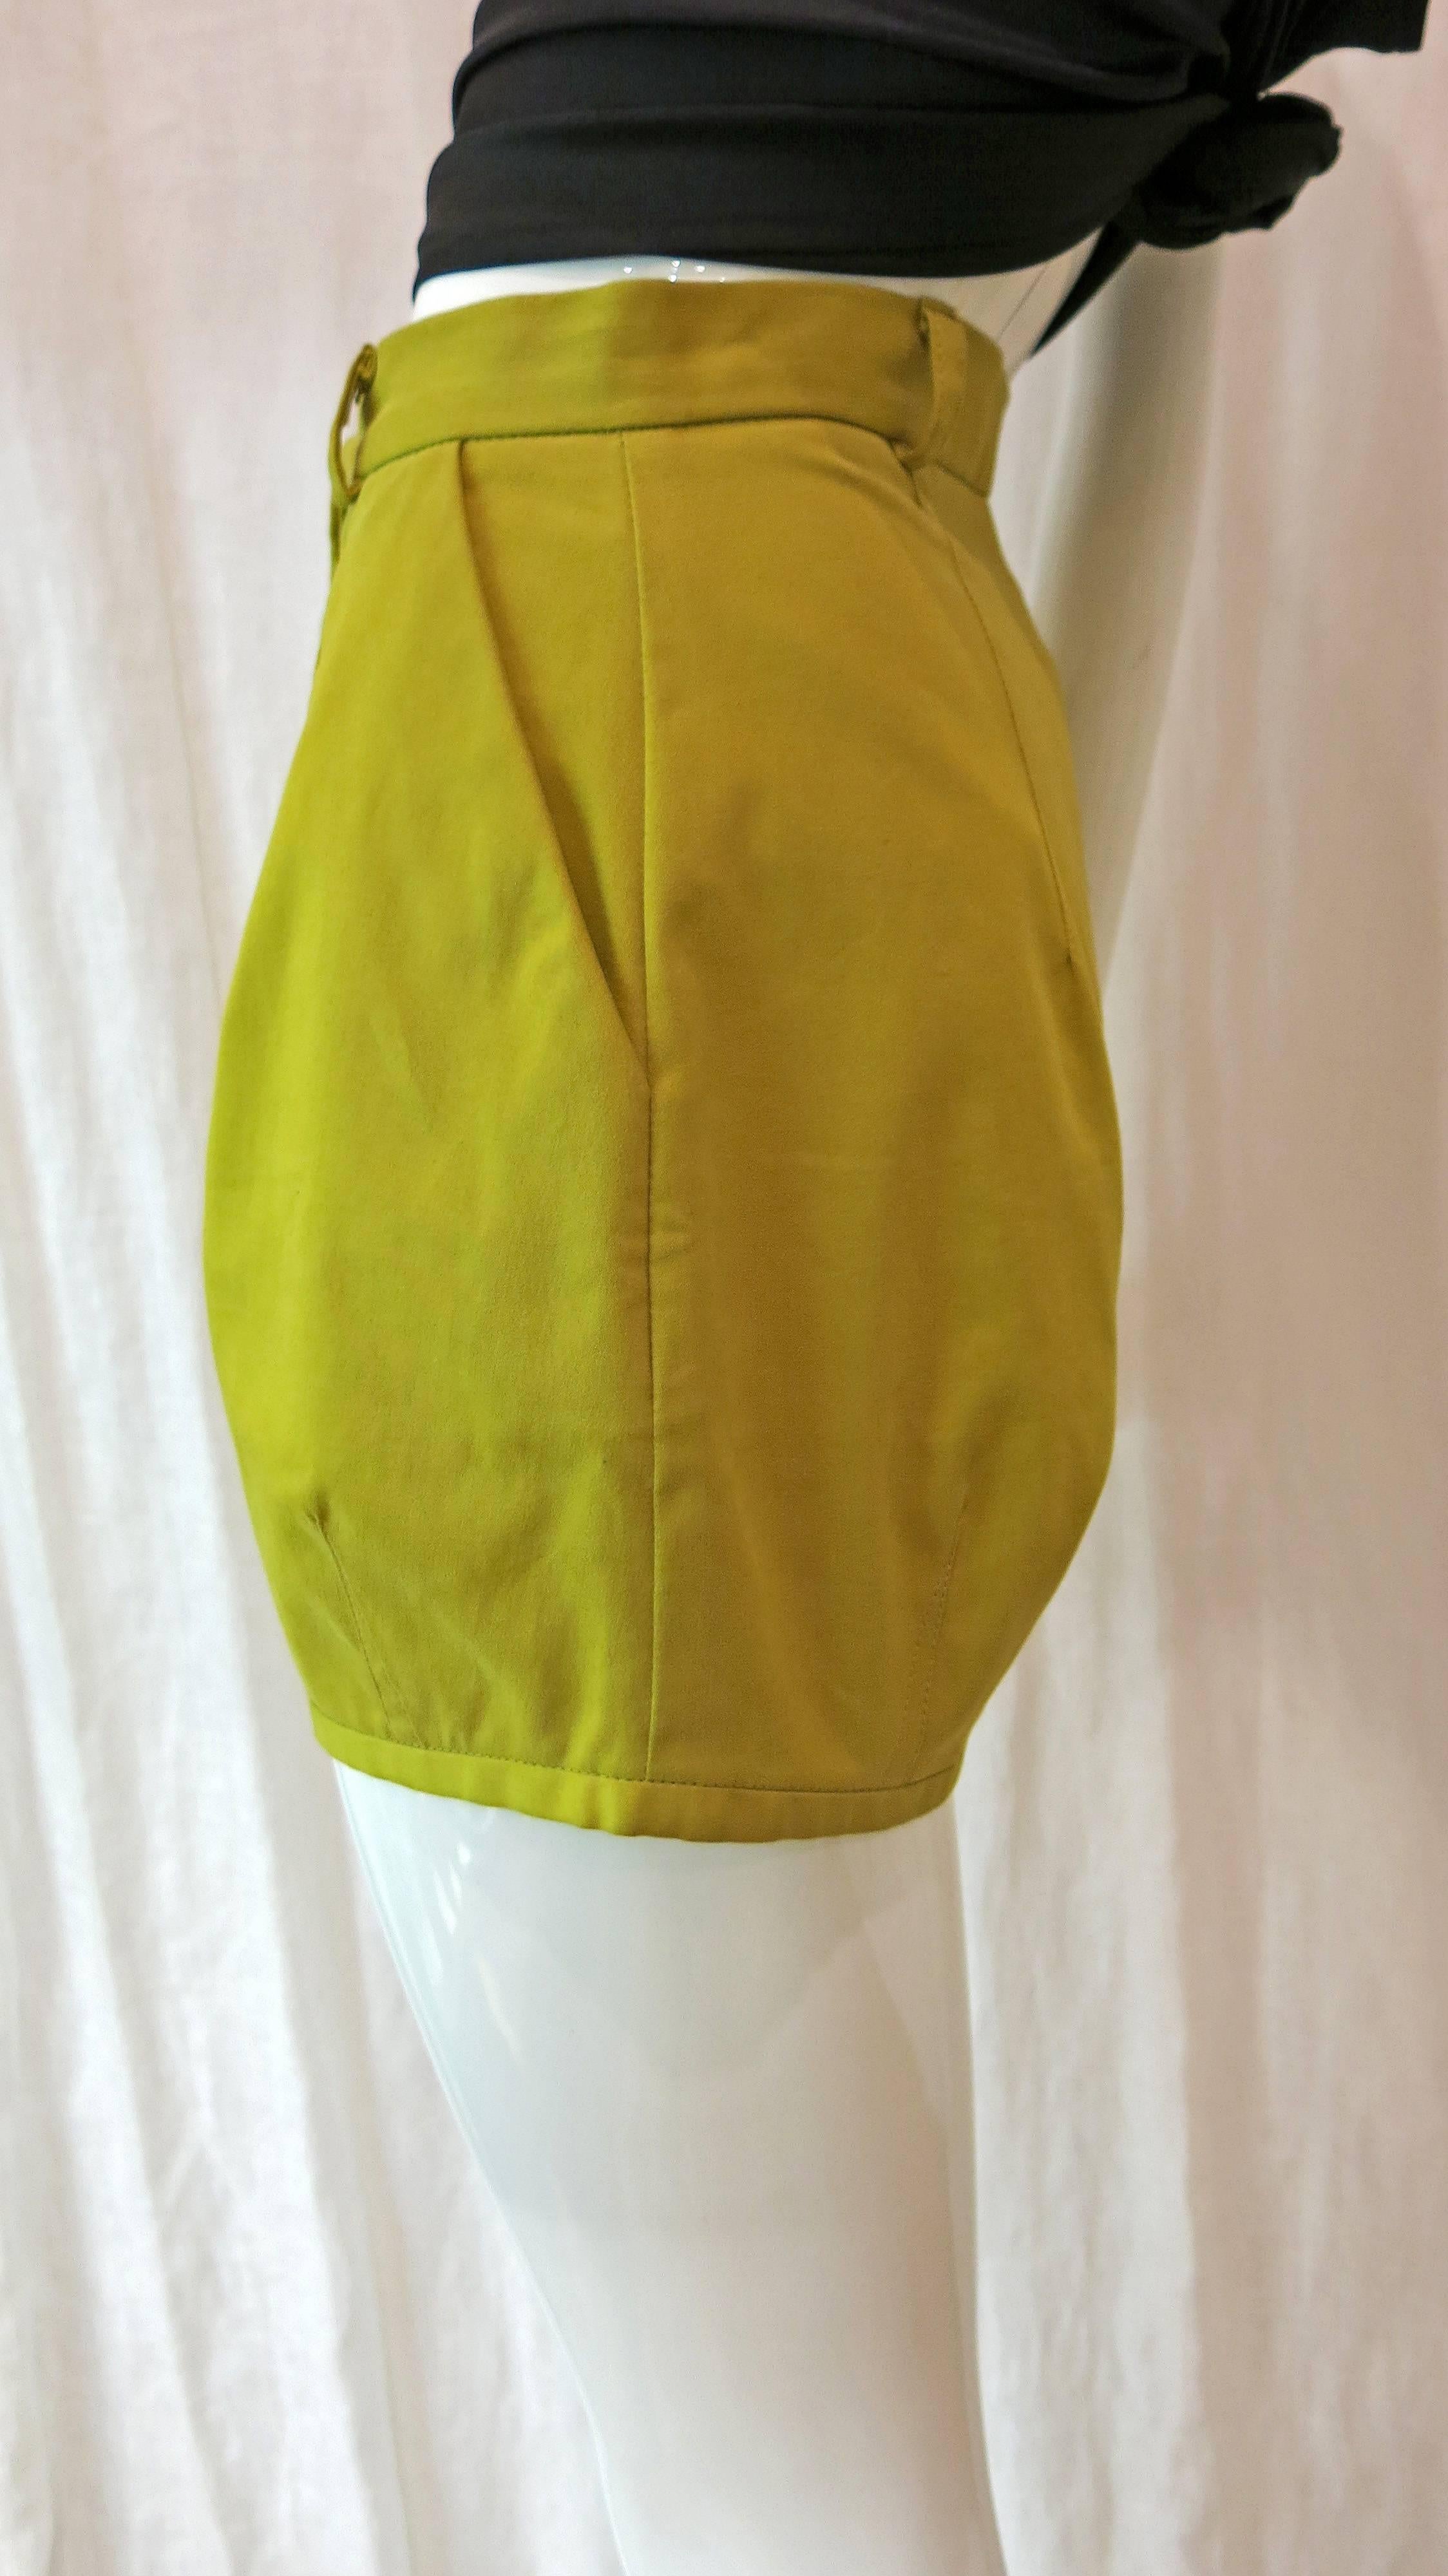 Chartreuse tiny, well-crafted shorts. Could be worn alone or with tights and a cropped sweater for a fun fall look. Single button and zip closure at front. Two front pockets, no back pockets. Unworn- still have original Vivienne Westwood Anglomania